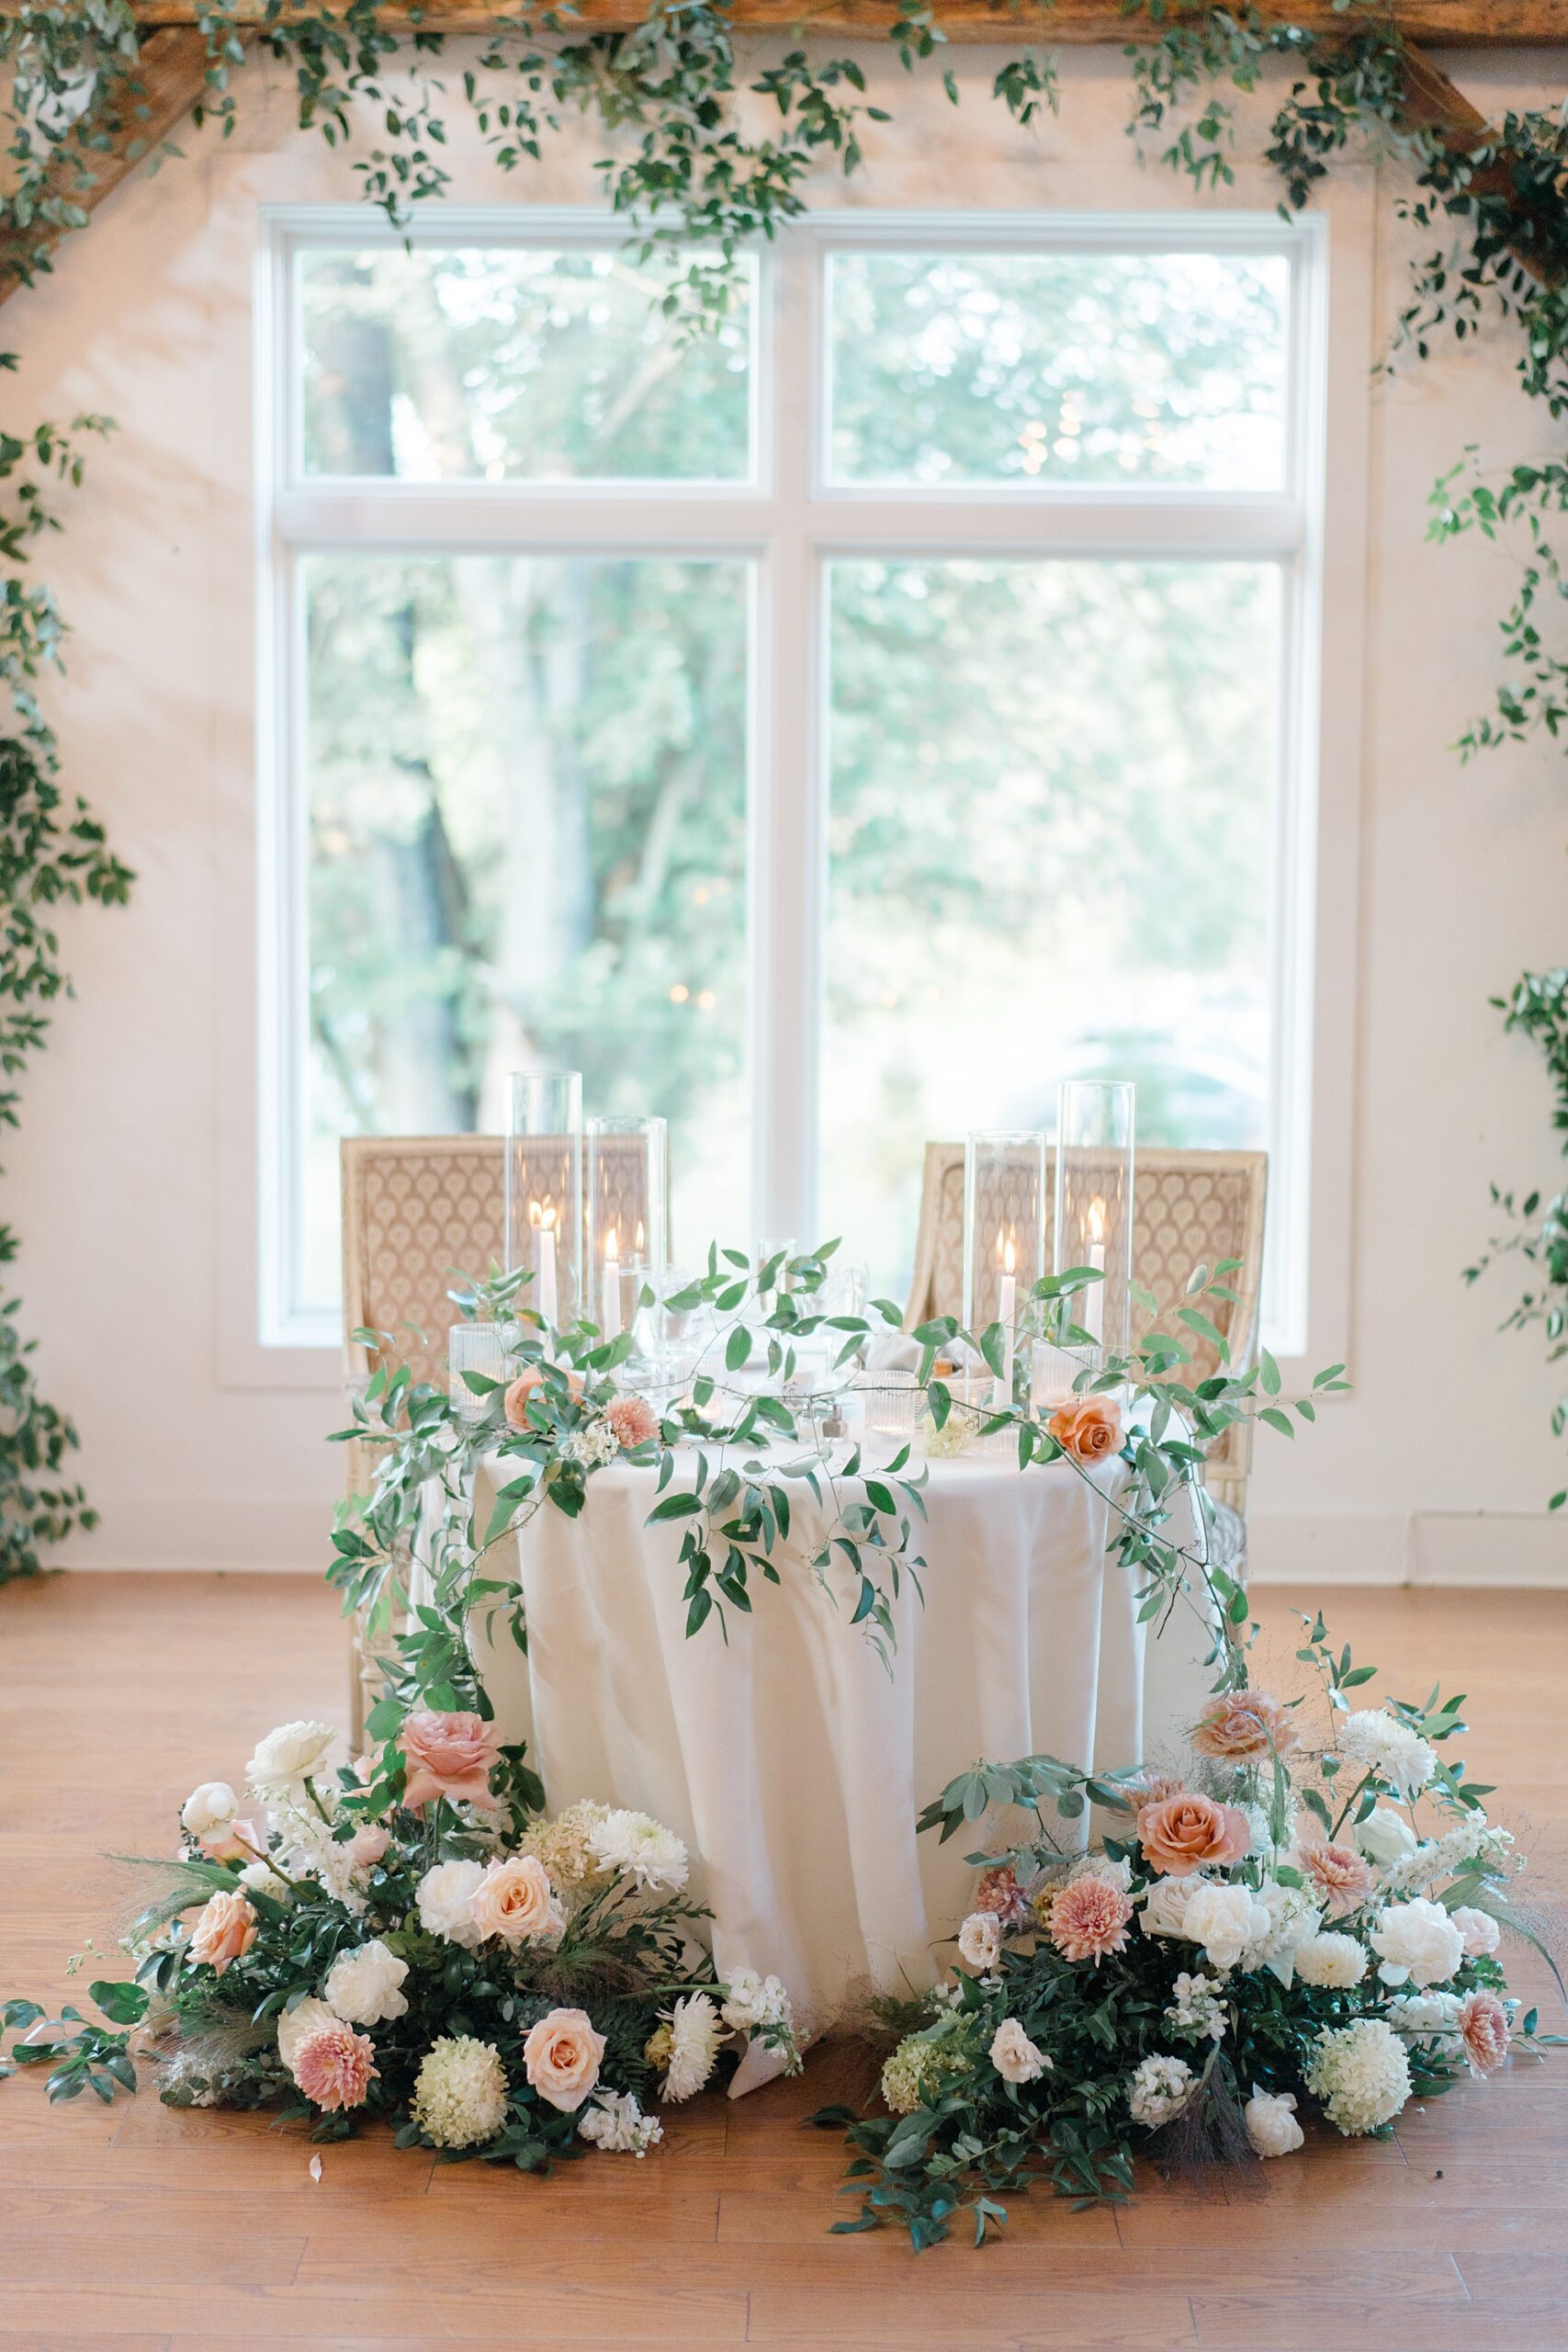 florals surround sweetheart table at reception from Romantic Floral-Centered Wedding at The Inn at Barley Sheaf Farm